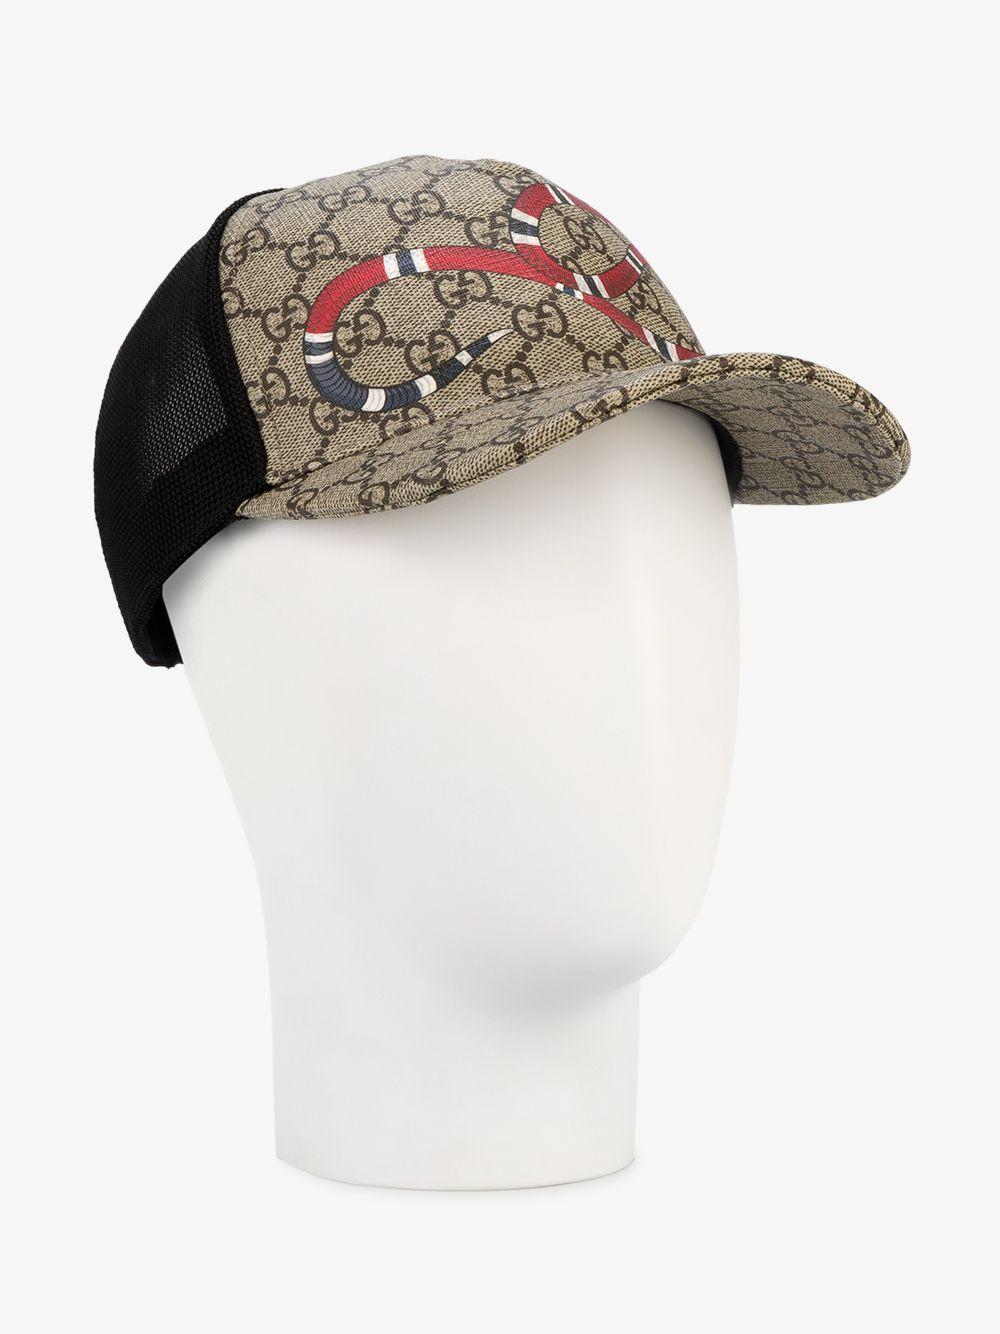 snake gucci hat discounts OFF